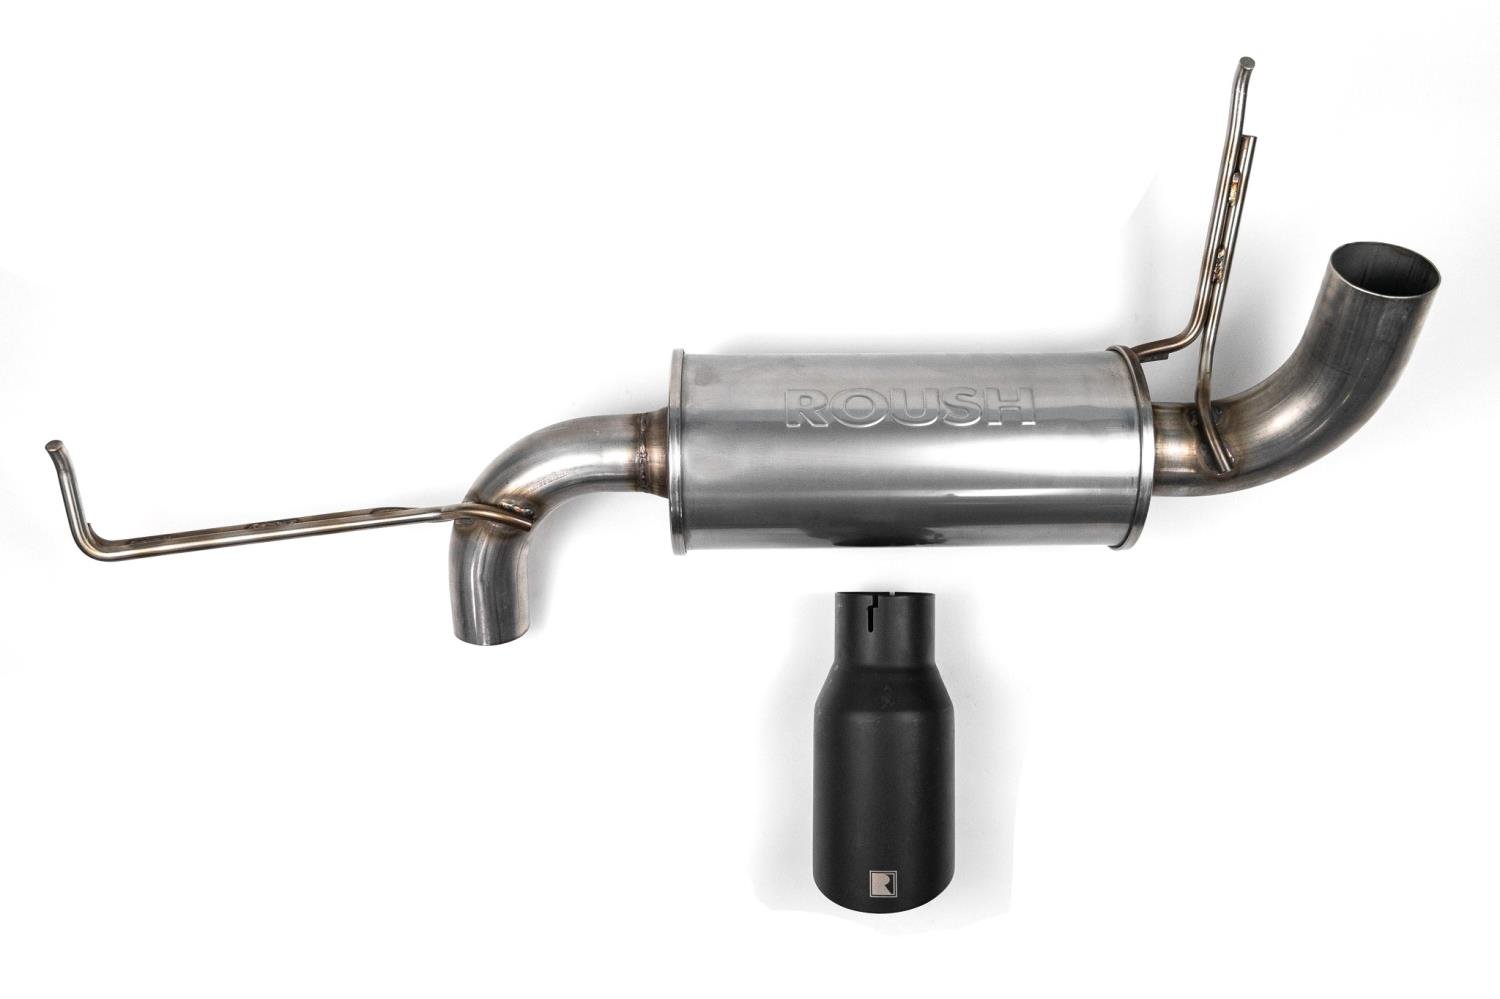 Axle-Back Exhaust System for Late-Model Ford Bronco 2.3L, 2021 Ford Bronco 2.7L